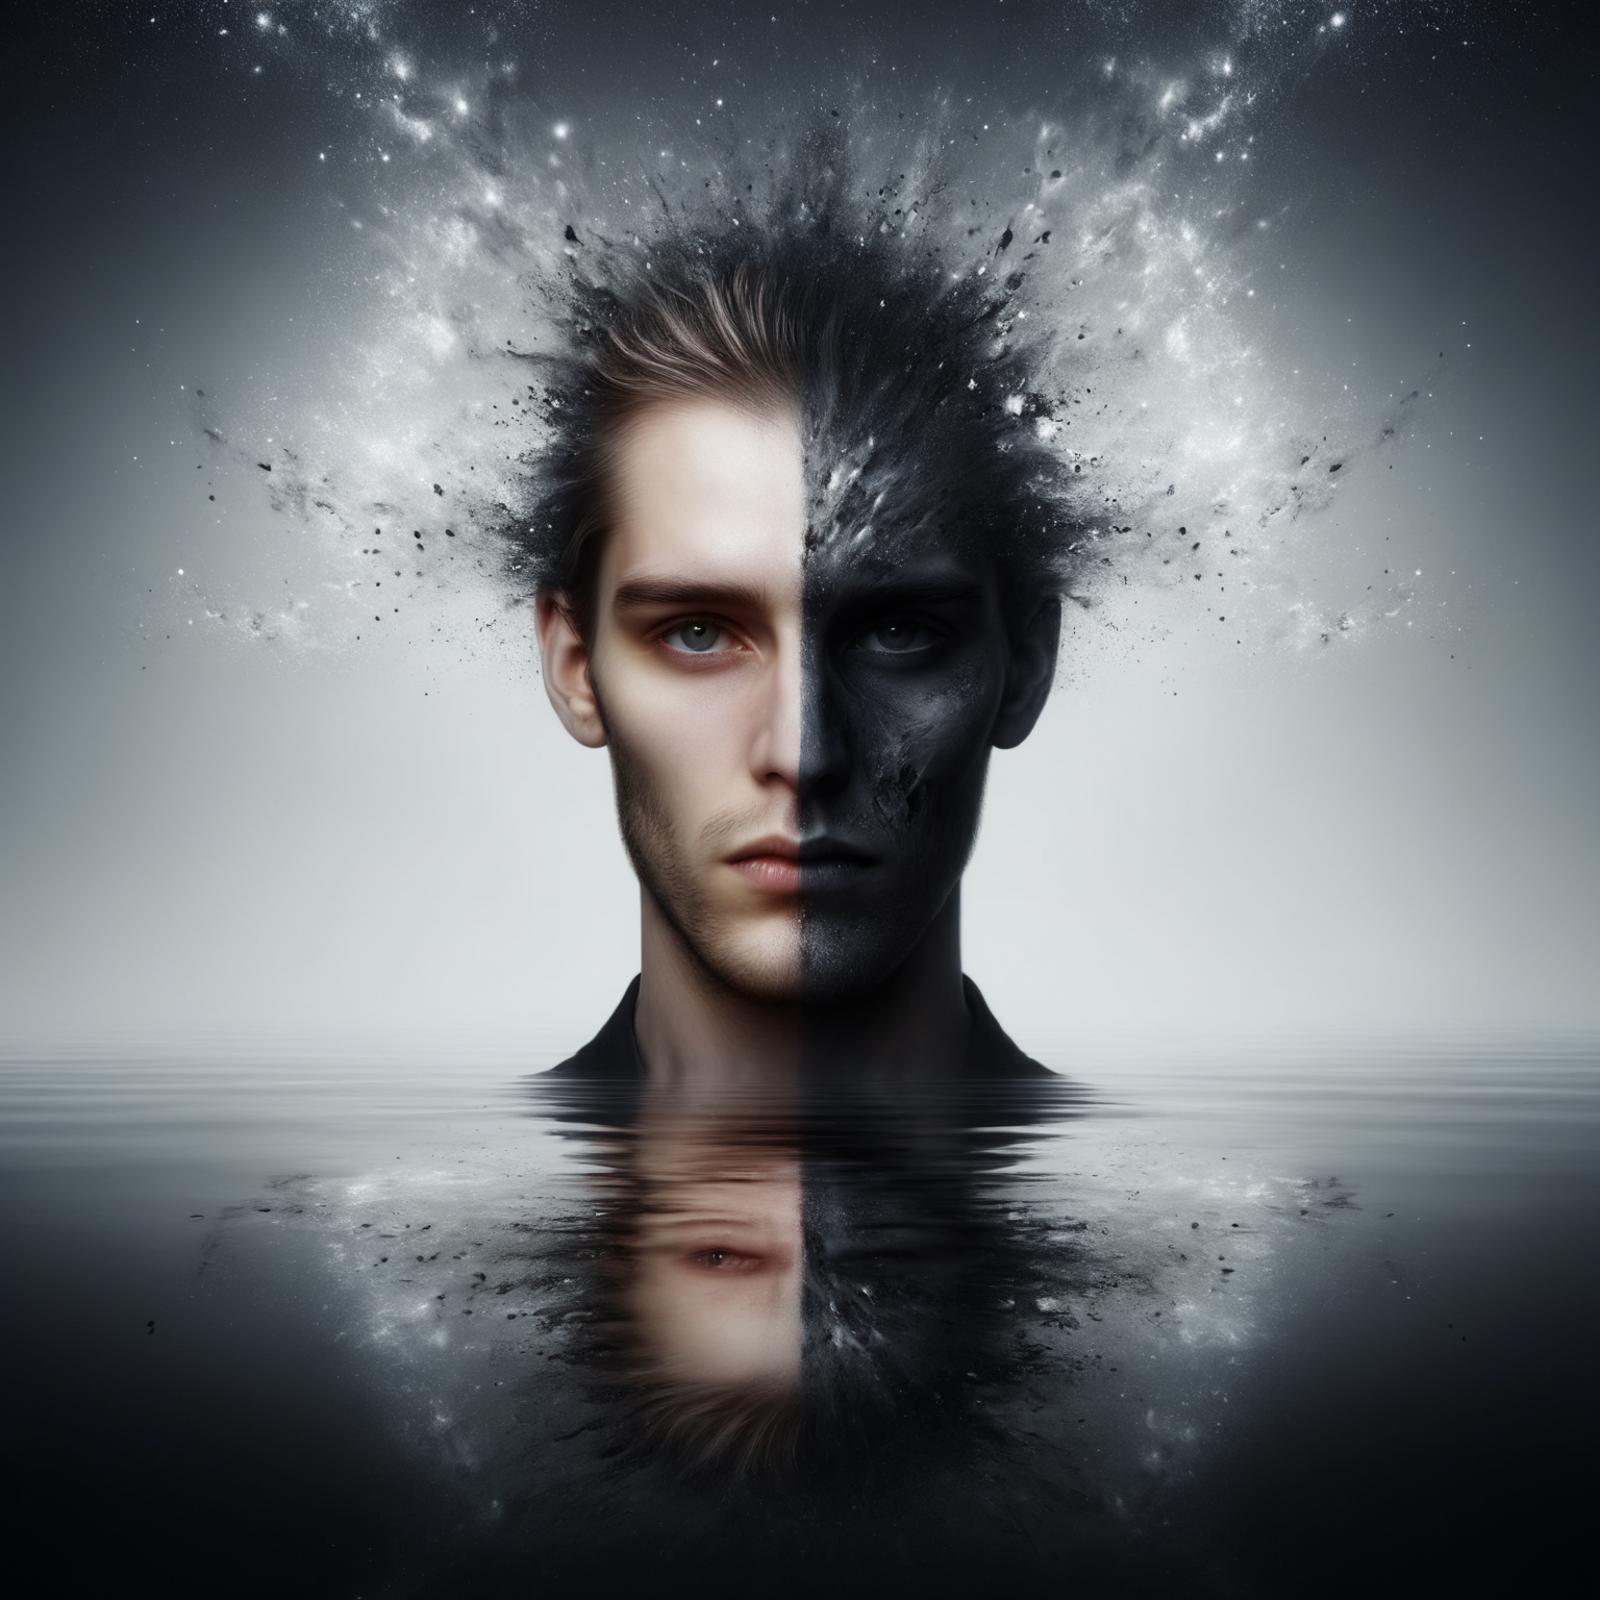 A man's face is split in two, with one half showing a dark and evil side while the other half shows a more positive and light side. The image is set in a black and white background with a reflection of the man in the water.